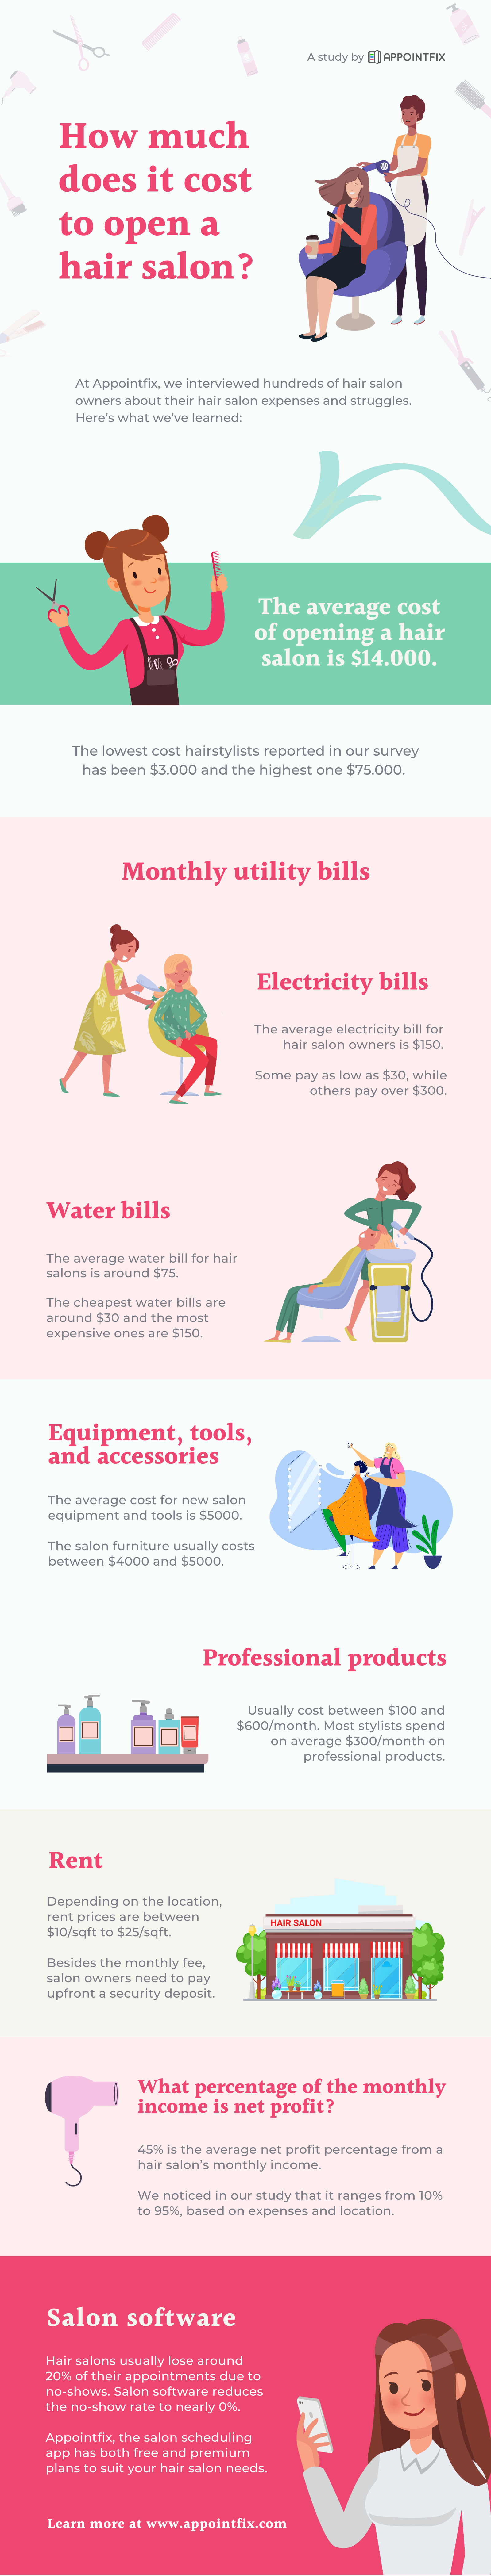 hair salon opening costs infographic